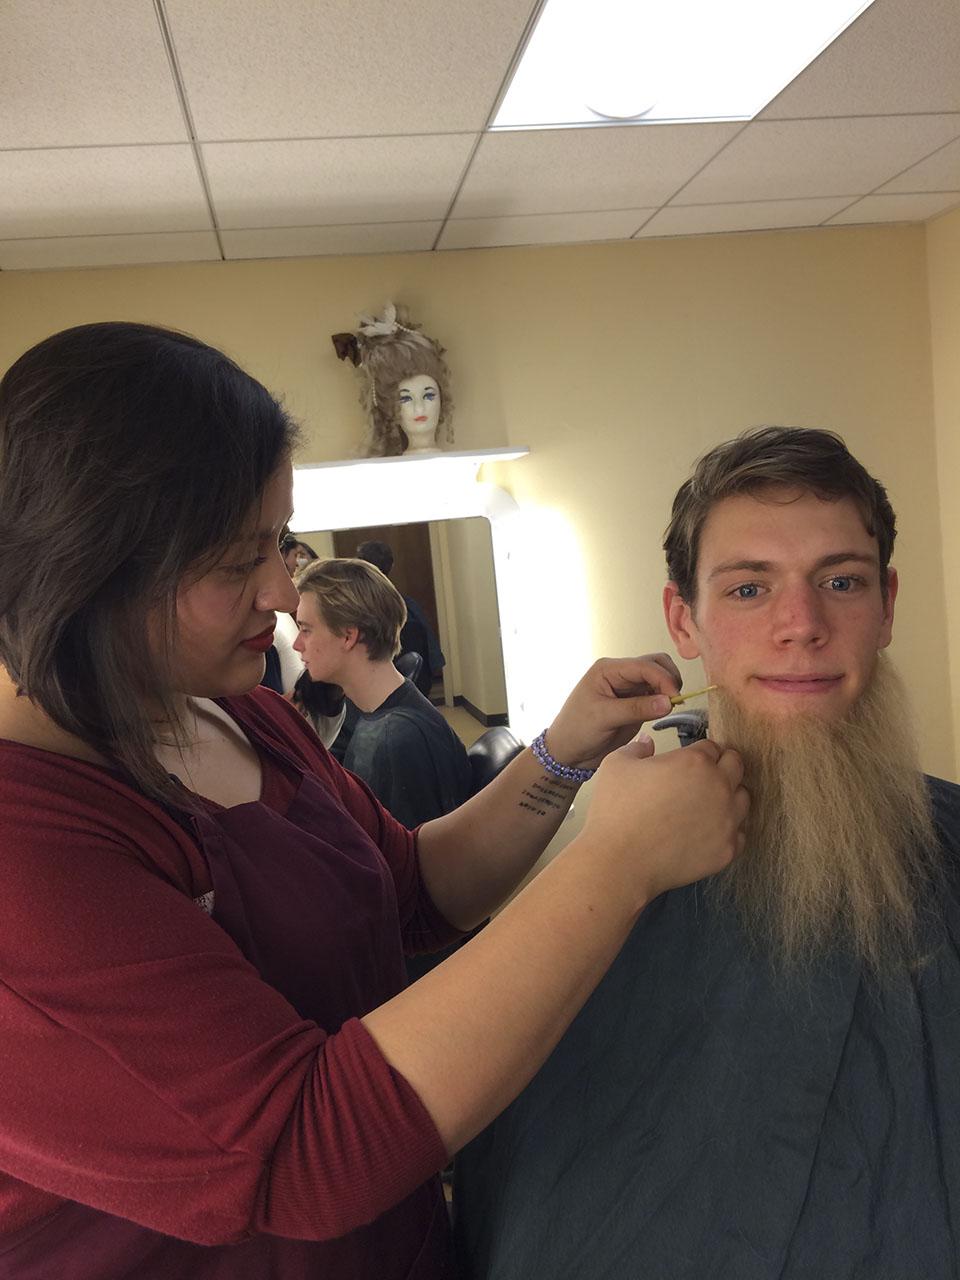 A female student with dark hair applies a false beard to a caucasian male student.